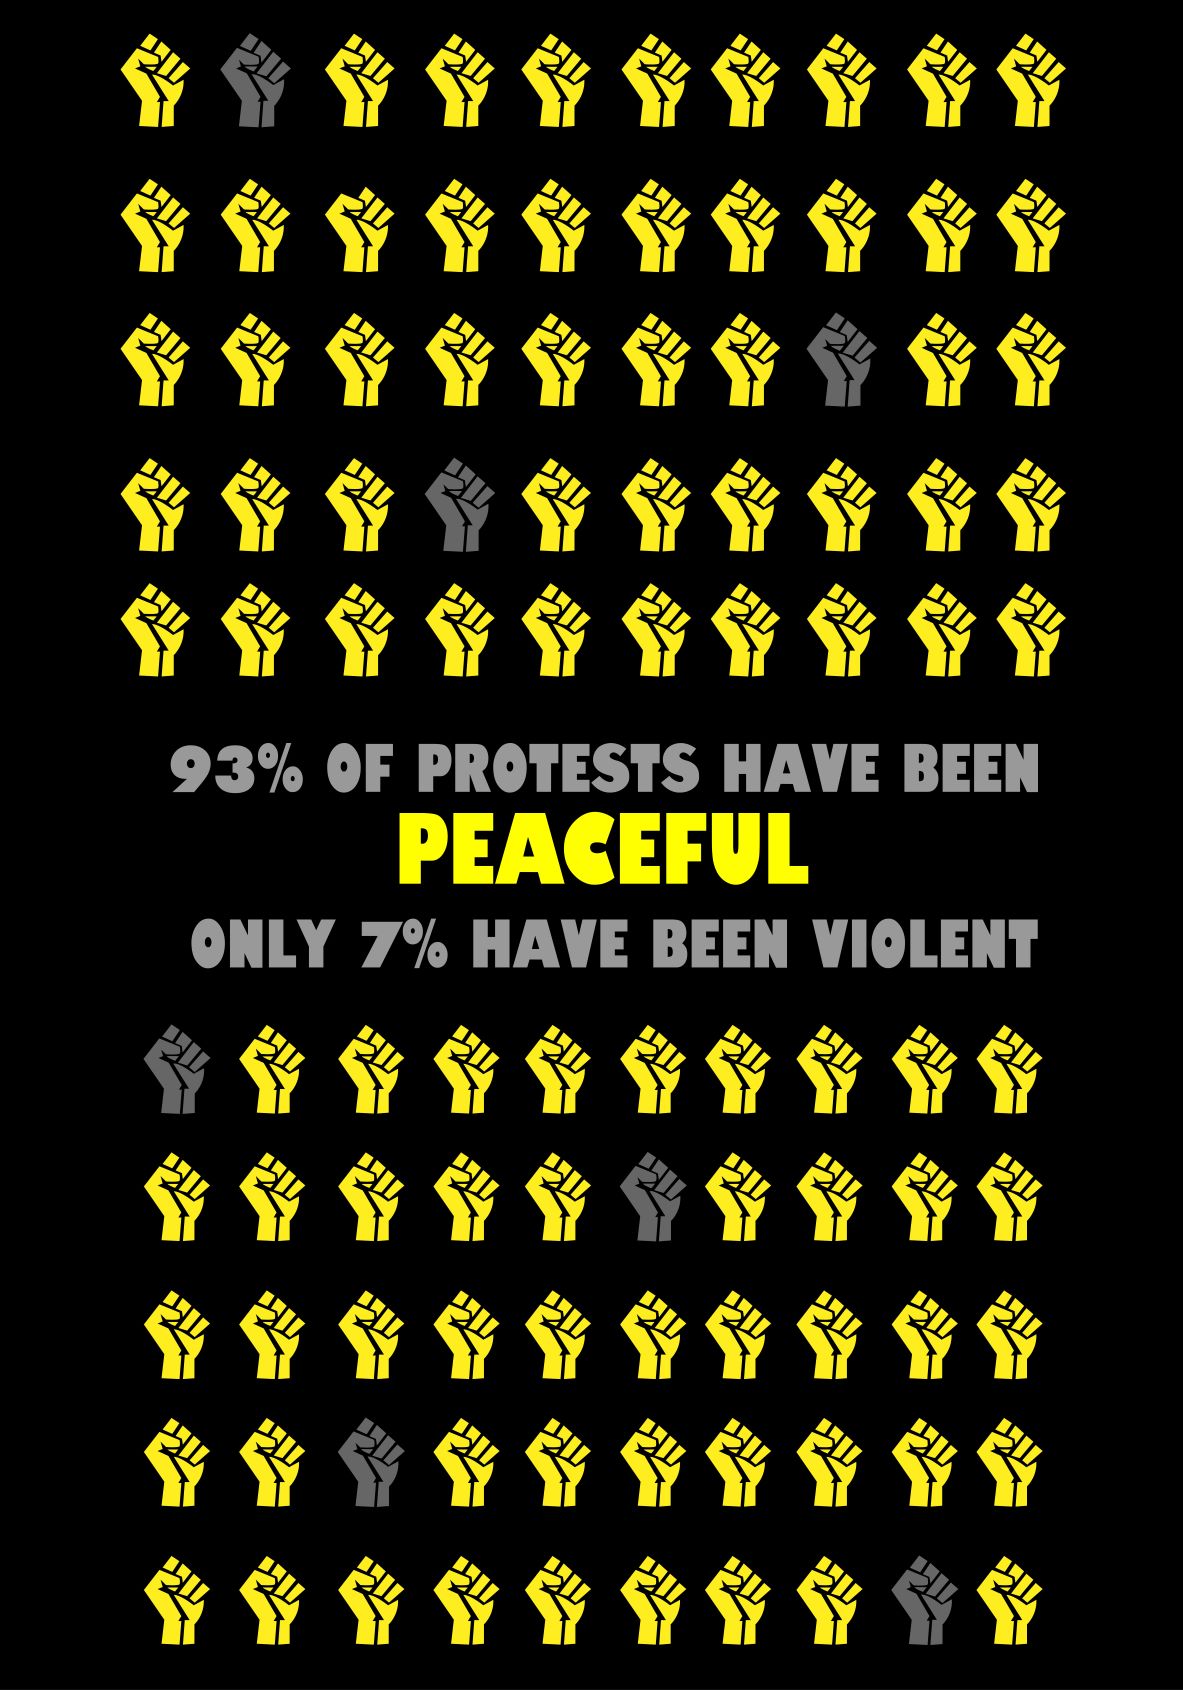 Image of fists, with text that reads 93% of protests have been peaceful only 7% have been violent